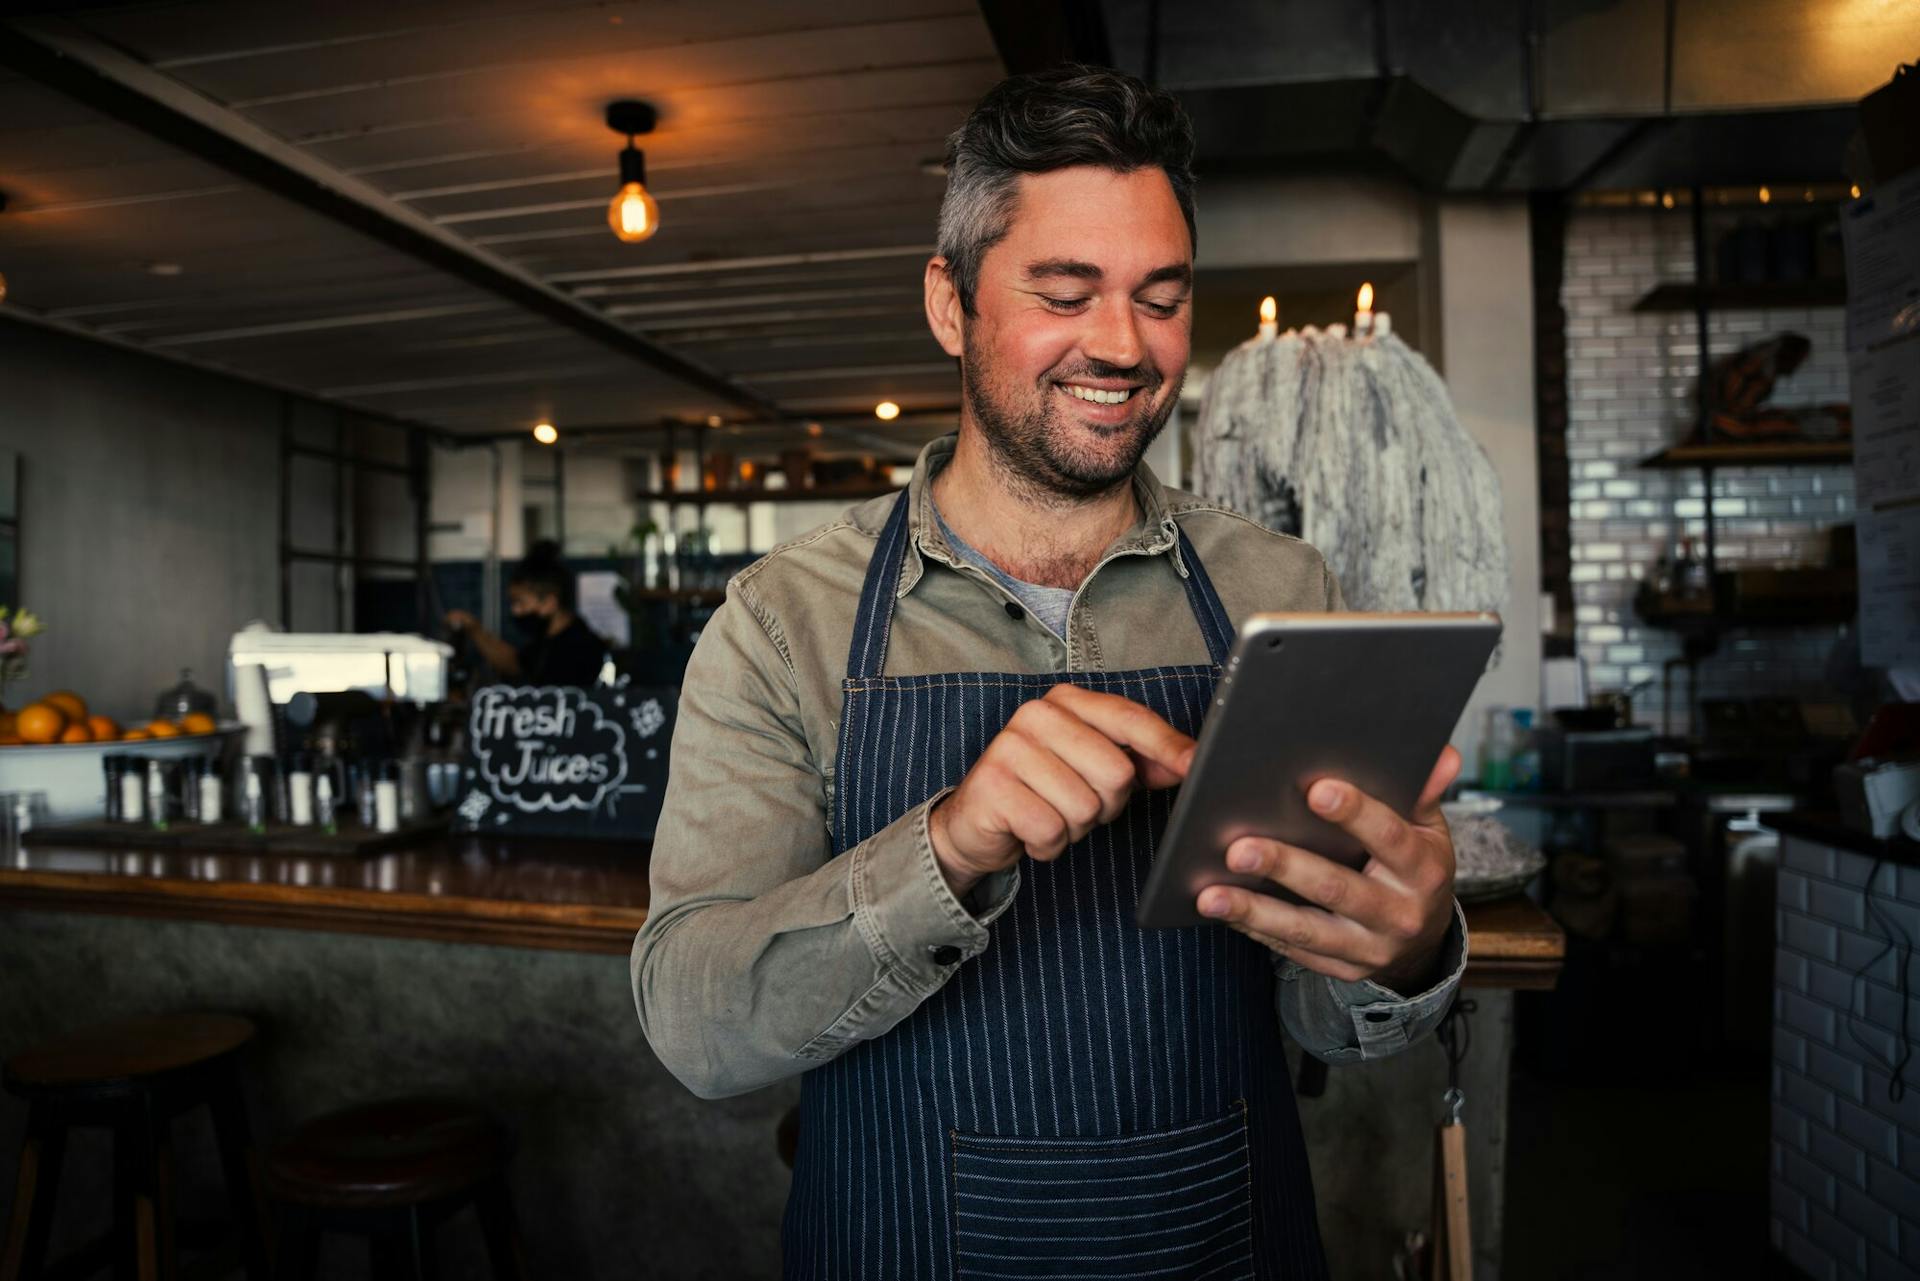 15 Restaurant Technology Tools You Need to Power Your Business